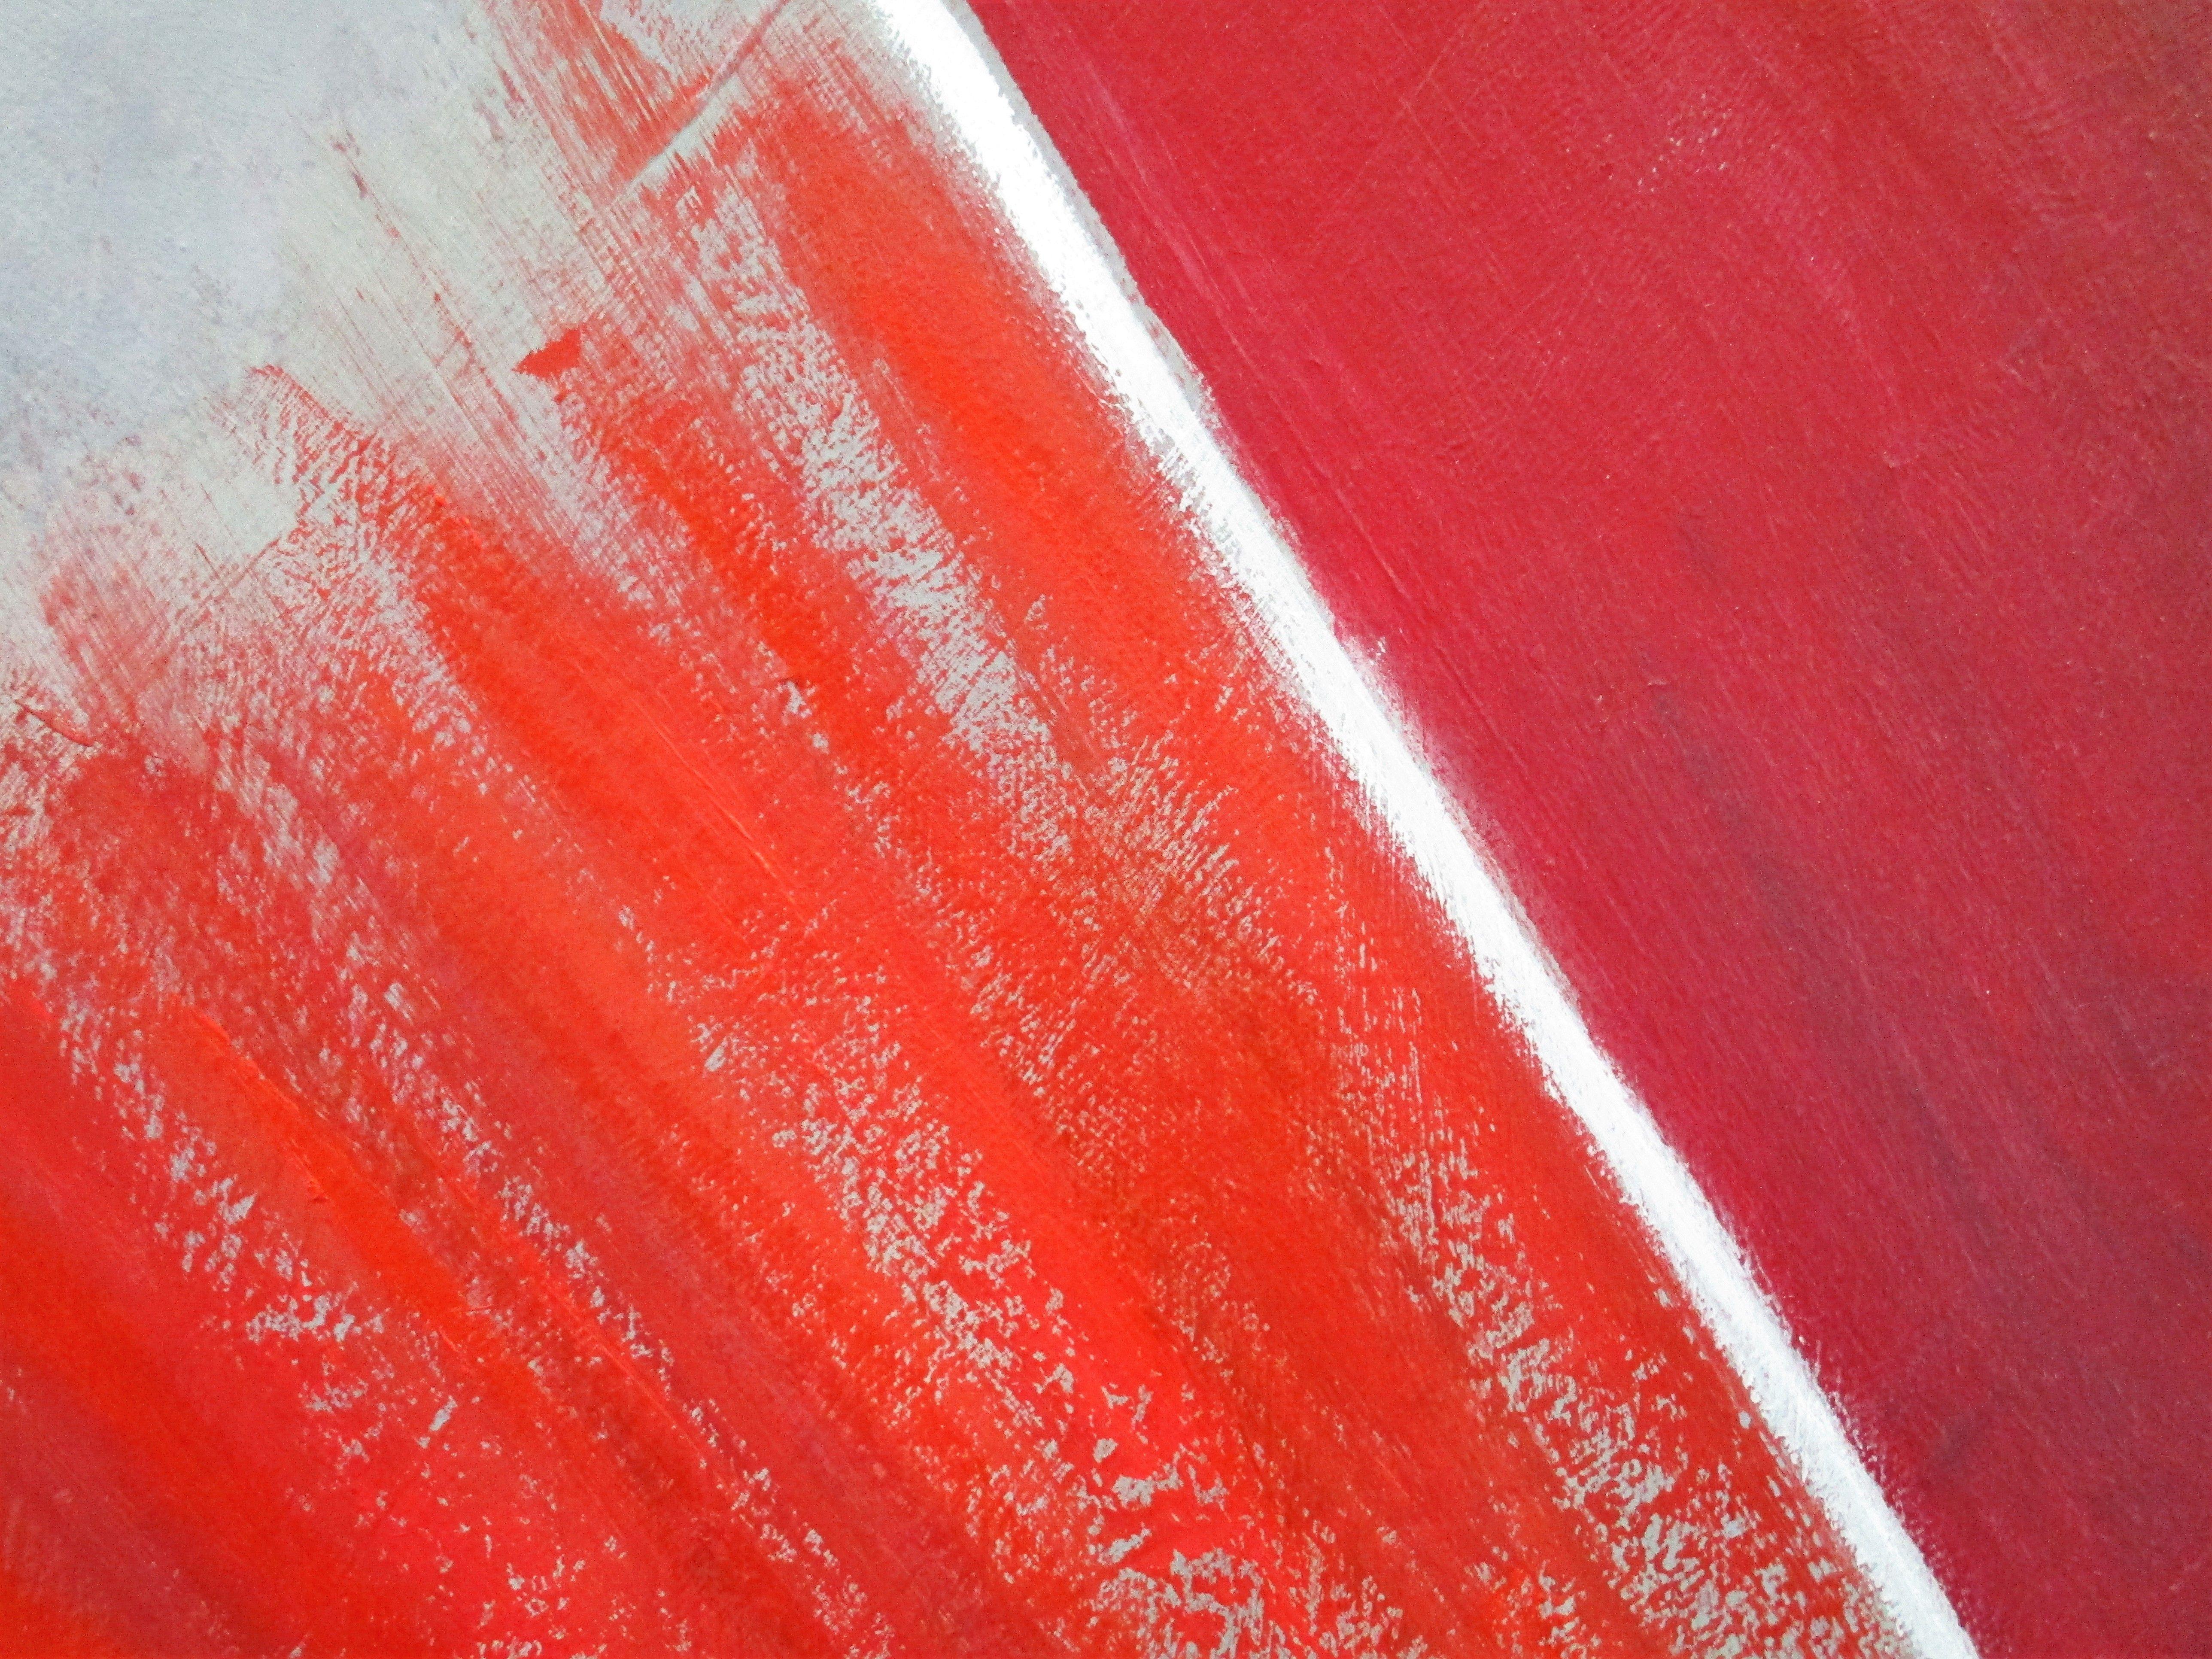 In a Heated Moment, Painting, Oil on Canvas - Red Abstract Painting by Lee Panizza